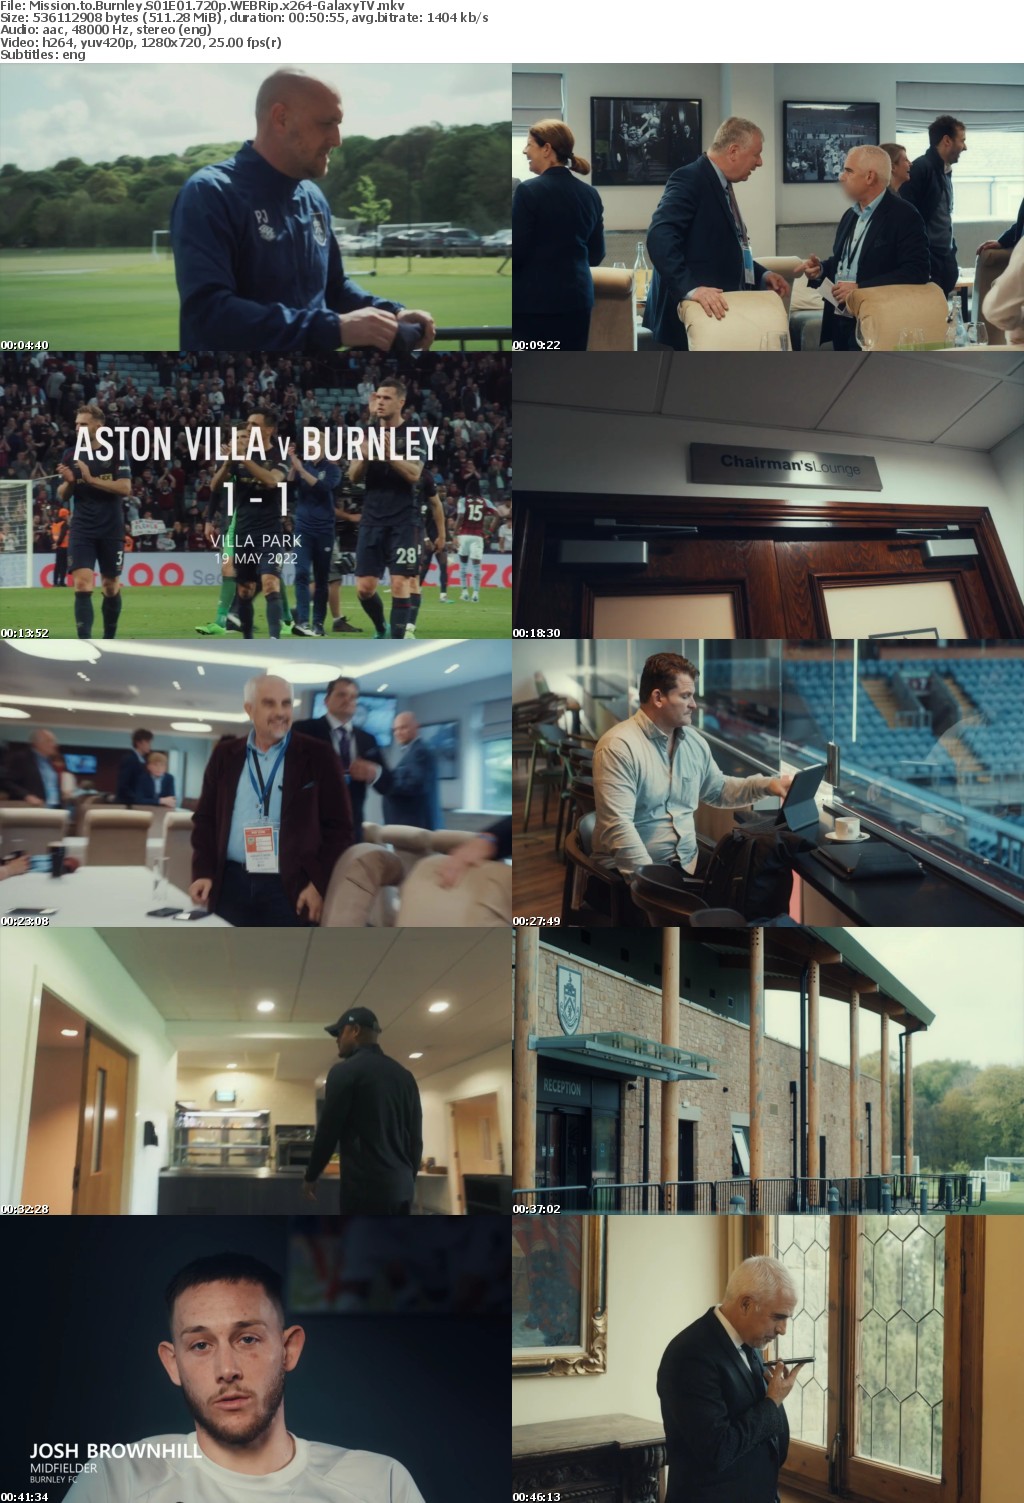 Mission to Burnley S01 COMPLETE 720p WEBRip x264-GalaxyTV